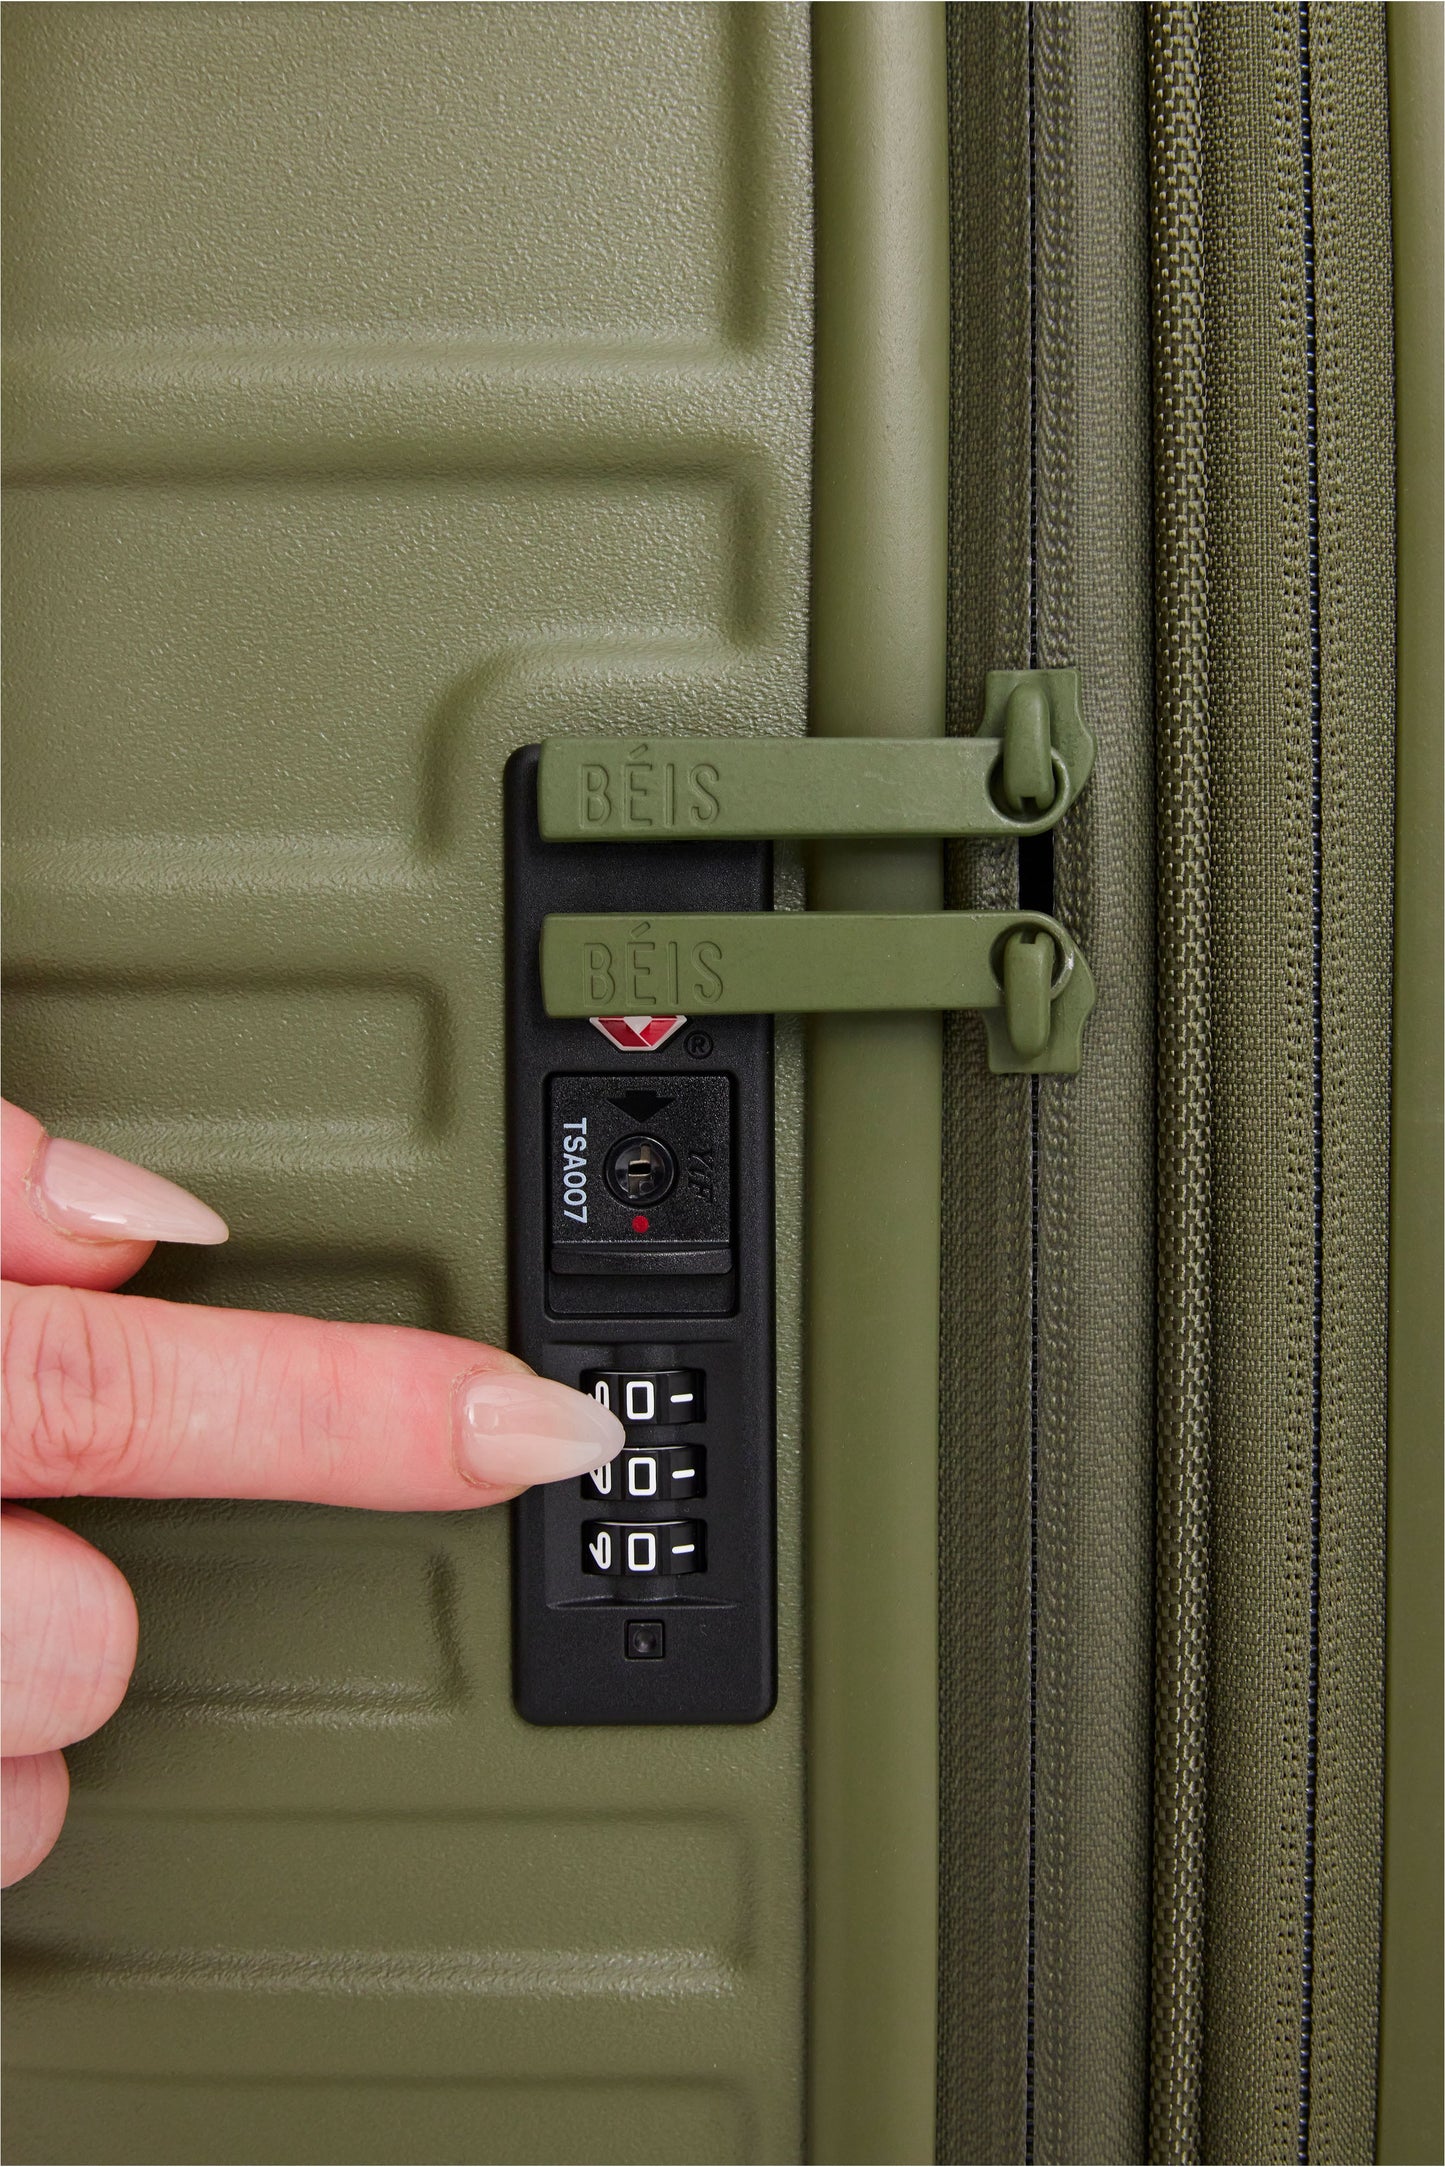 The Carry-On Roller in Olive